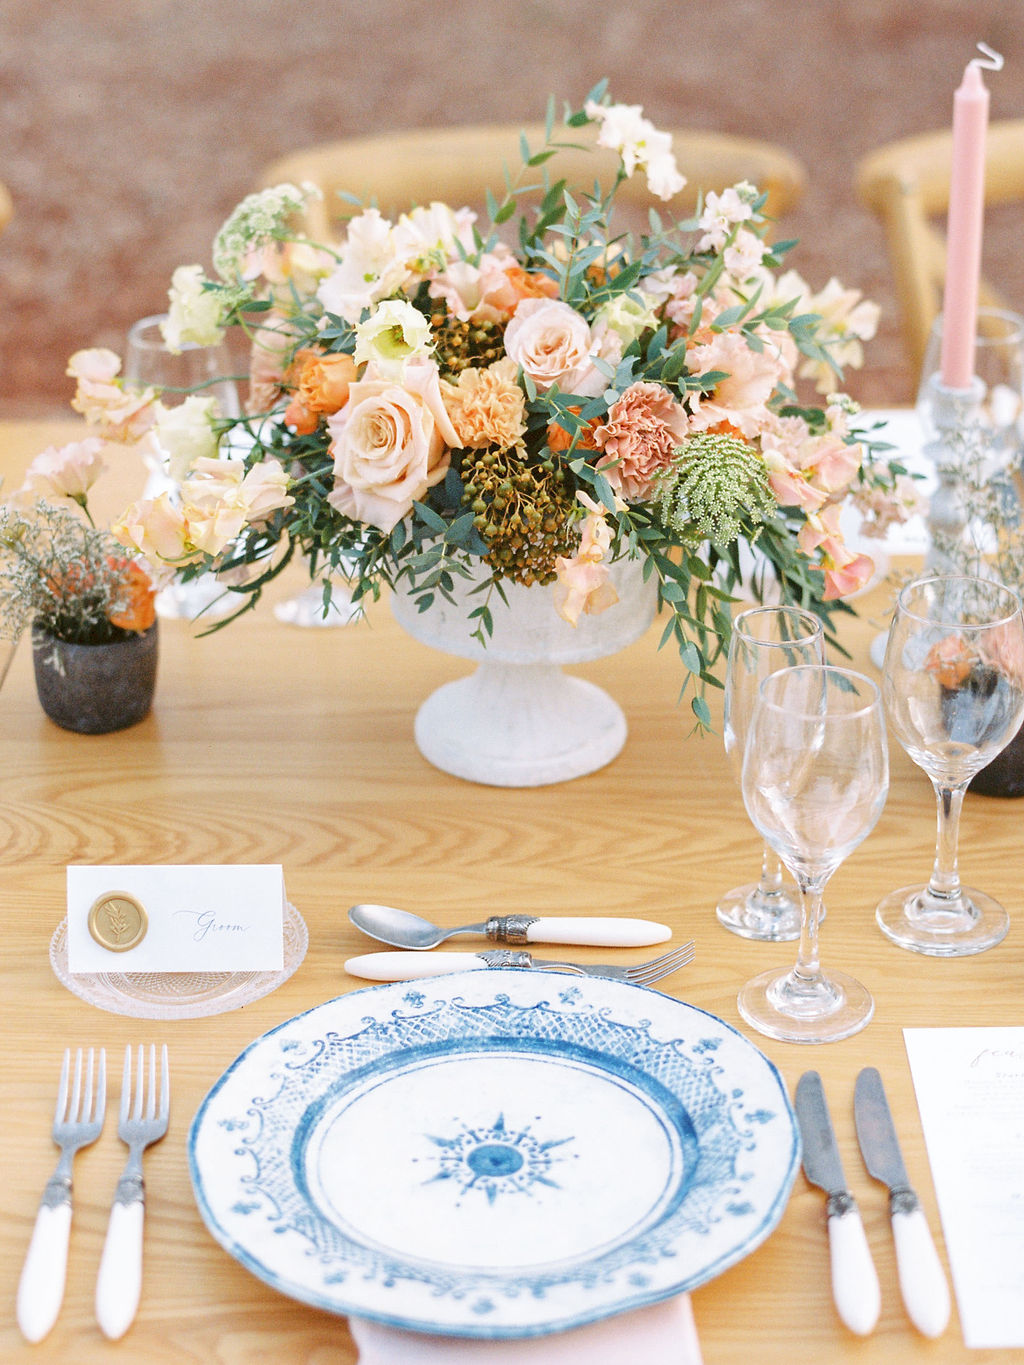 Olive Grove Wedding In Greece - Table Setting